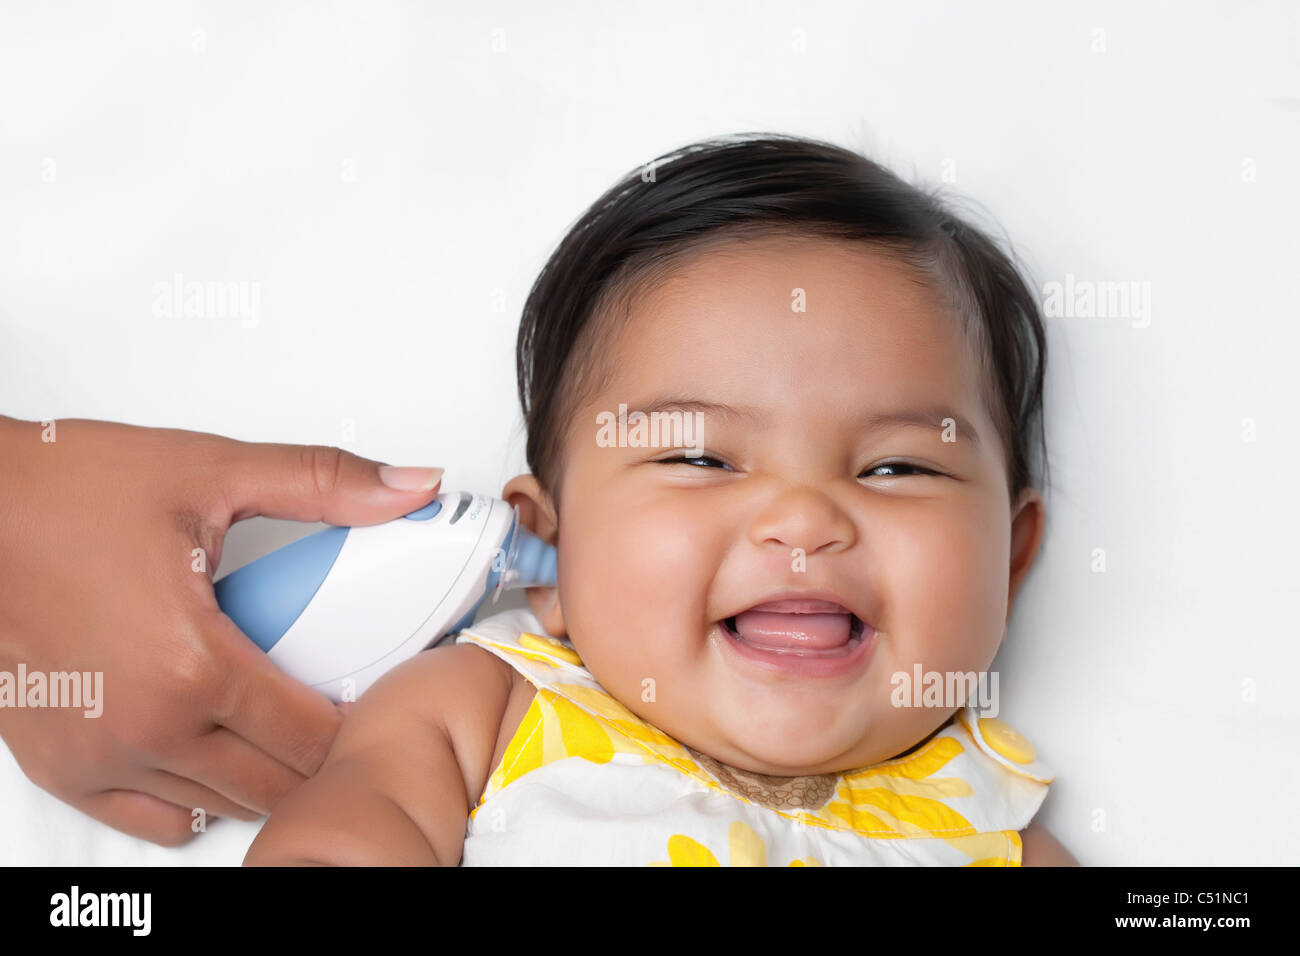 Healthy baby having temperature taken using an infrared ear thermometer Stock Photo